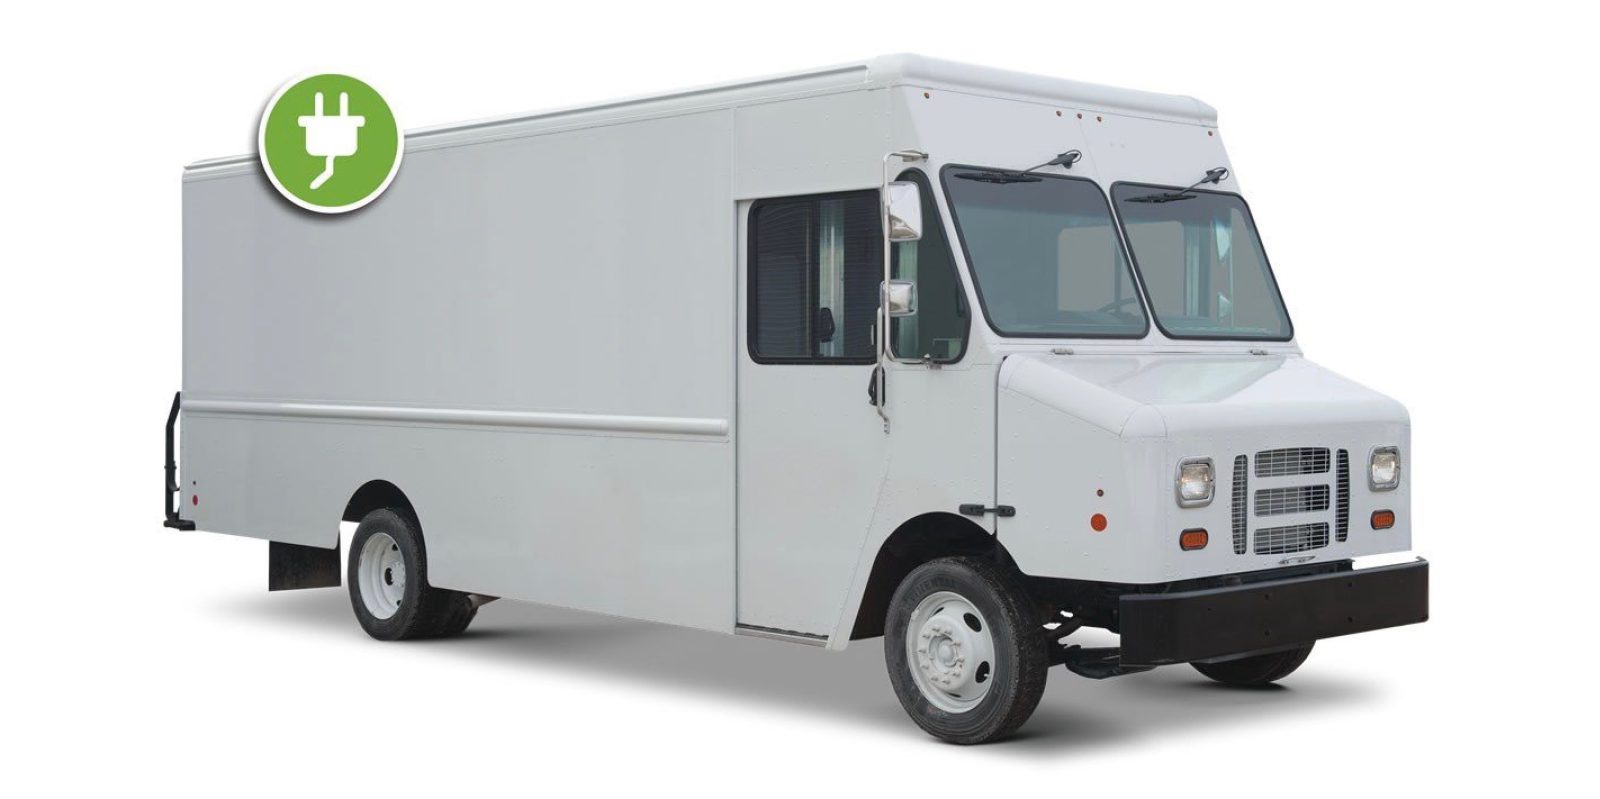 Lightning Ford F-59 electric food truck